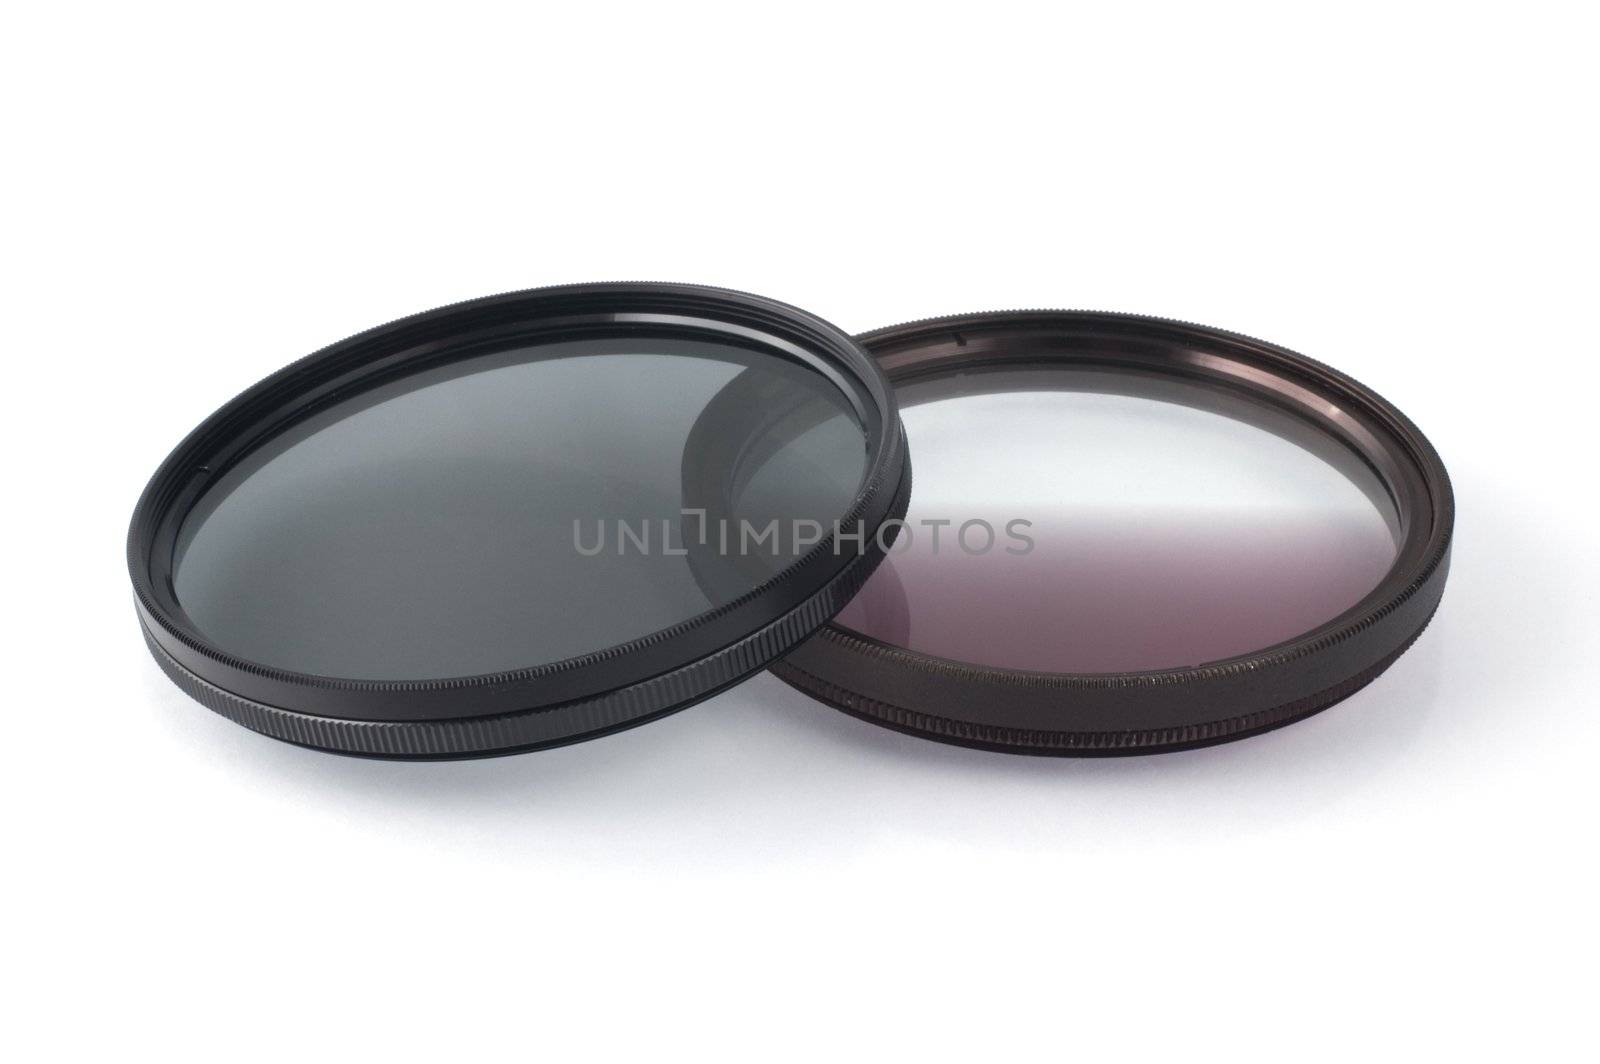 Polarizing filter and graduated NG filter isolated on white